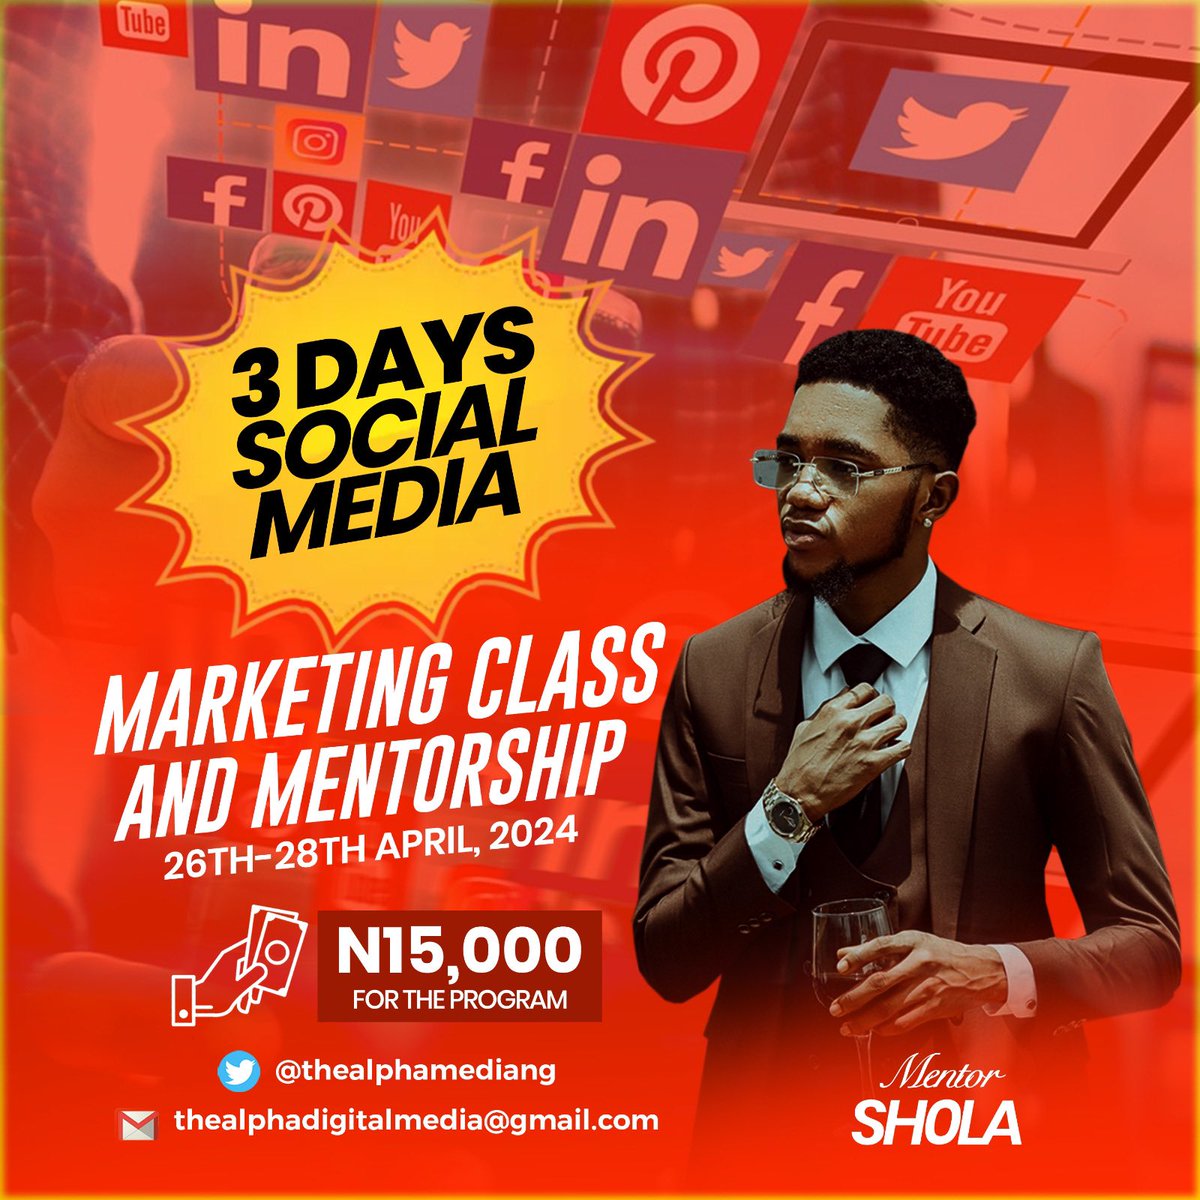 Become a successful social media marketer. Registration still on, don’t miss out. Send a DM if interested.